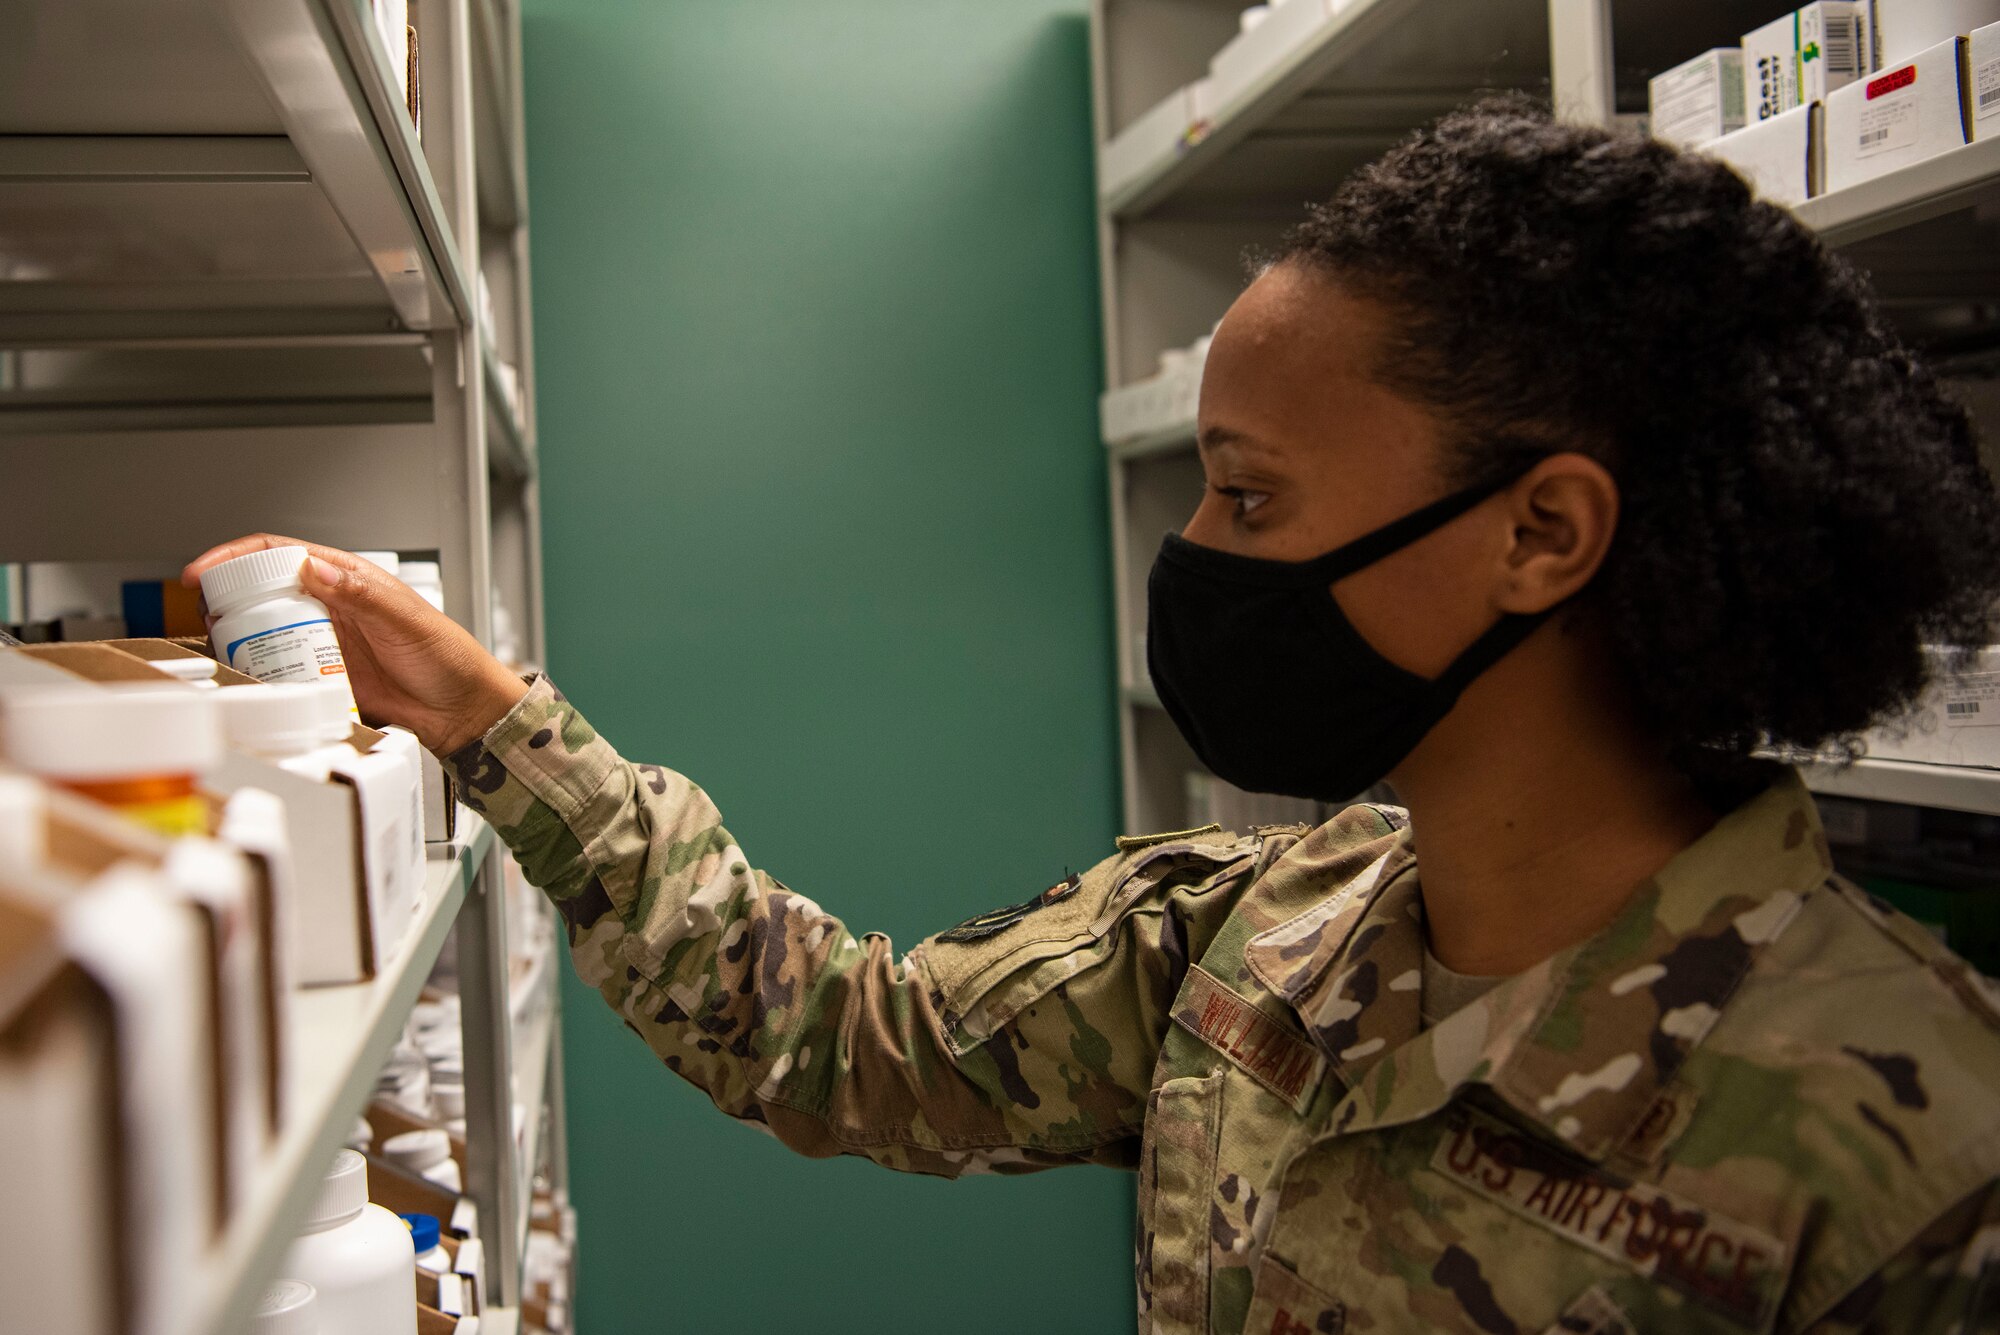 Capt. Ciera Williams, 36th Healthcare Operations Squadron chief of pharmacy operations, reaches for a medication in the pharmacy at Andersen Air Force Base, Guam, Jan. 28, 2021. During the last week of January, members of Andersen AFB recognized all the hard work done by Airmen in the Biomedical Science Corps in honor of the 56th Annual Biomedical Science Corps Appreciation Week. (U.S. Air Force photo by Senior Airman Aubree Owens)